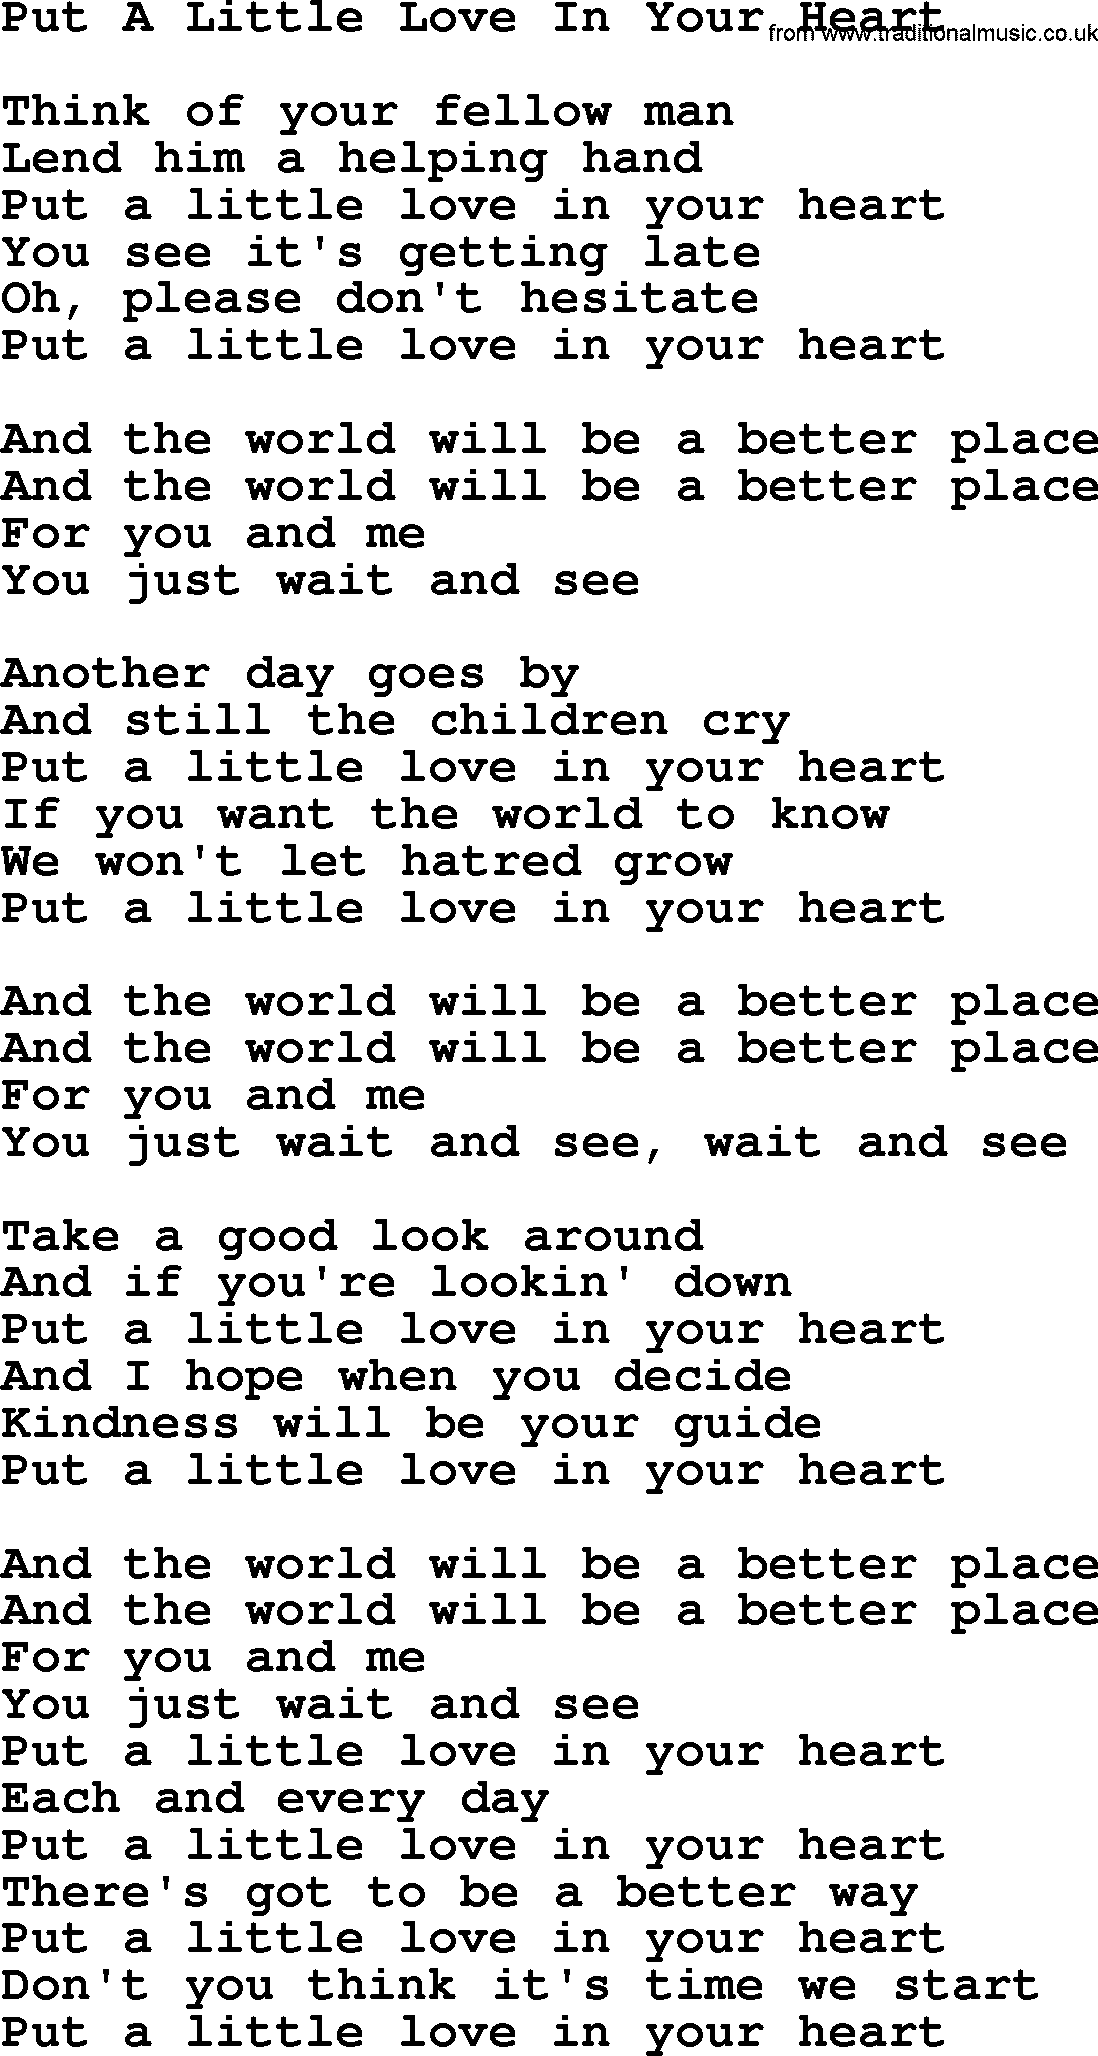 Dolly Parton song Put A Little Love In Your Heart.txt lyrics